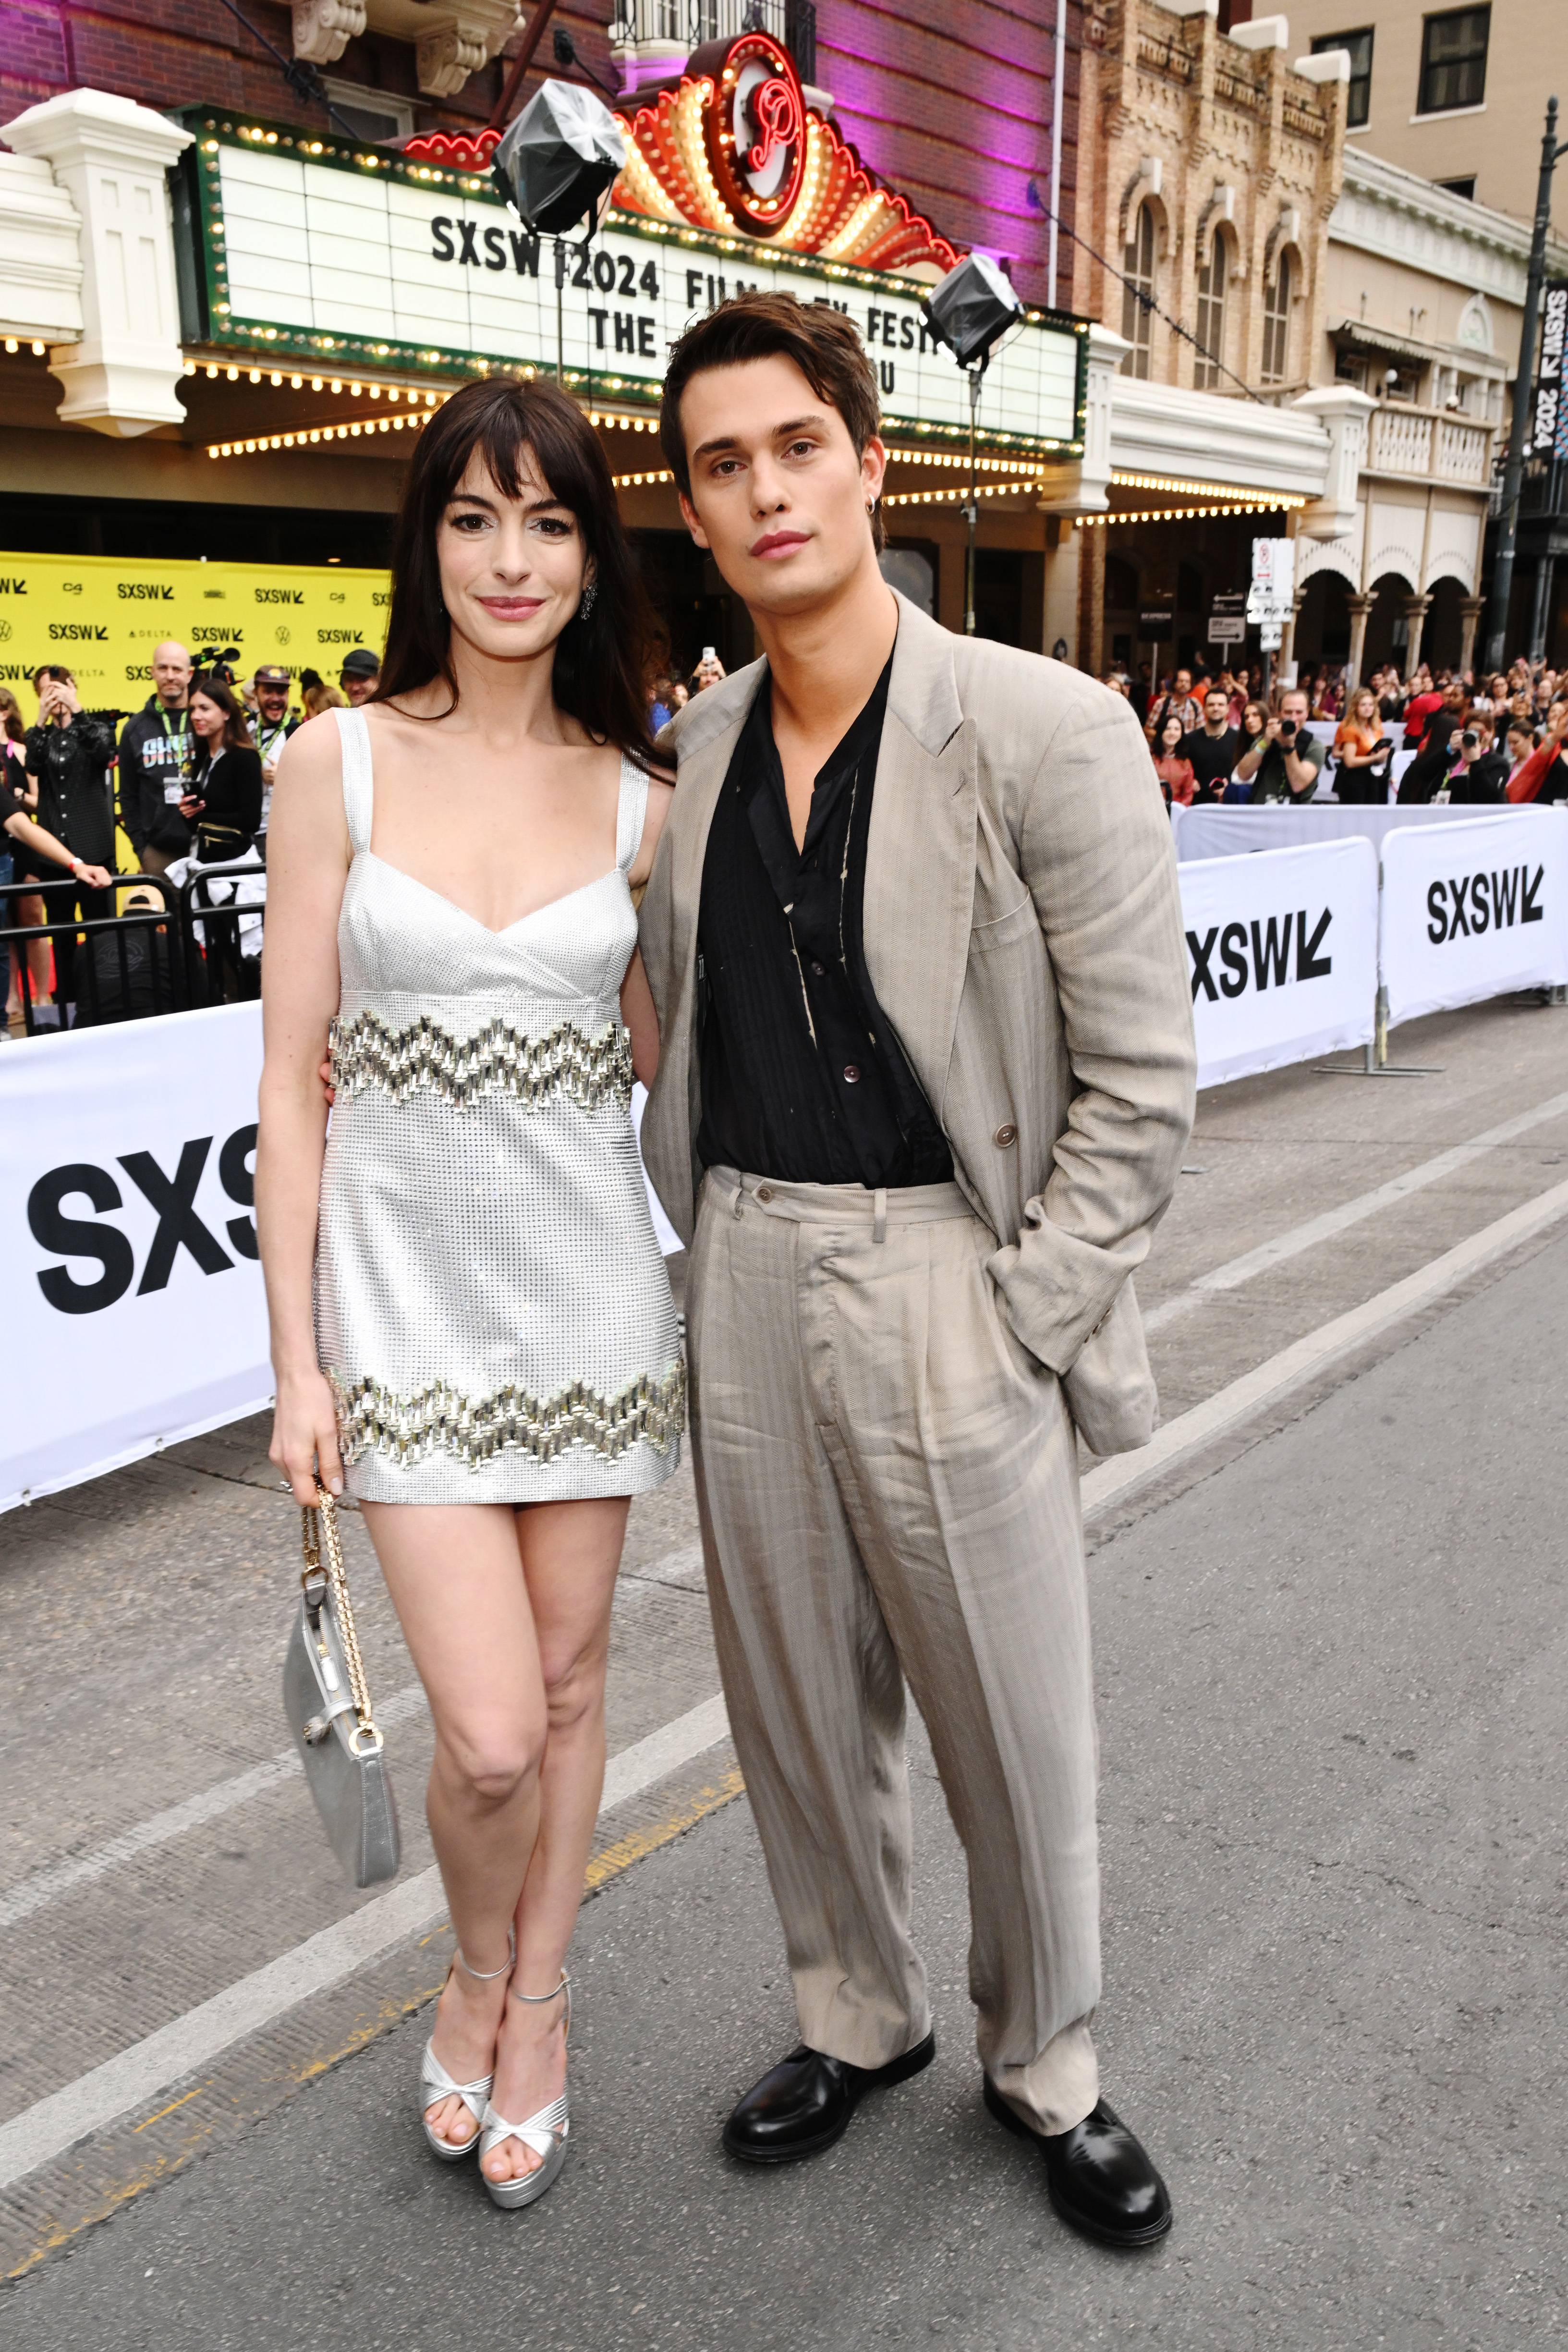 Closeup of Anne Hathaway and Nicholas Galitzine standing in the street at a SXSW event